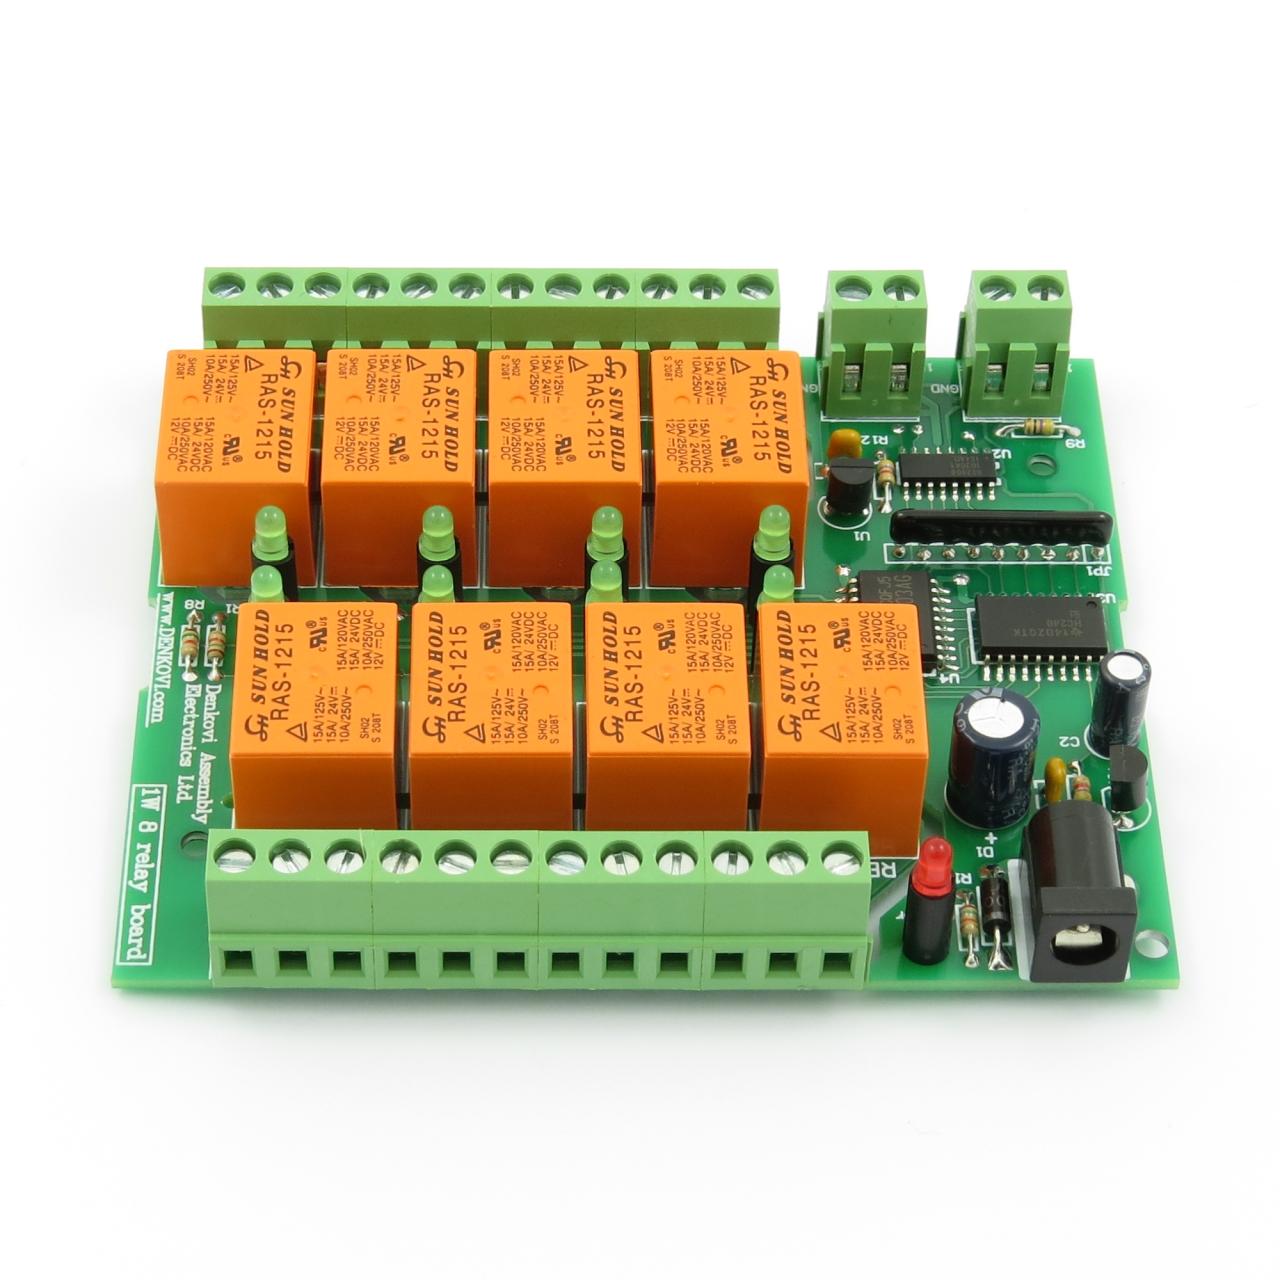 1Wire, 8 Channel Relay Module Board based on Dallas DS2408 chipset eBay